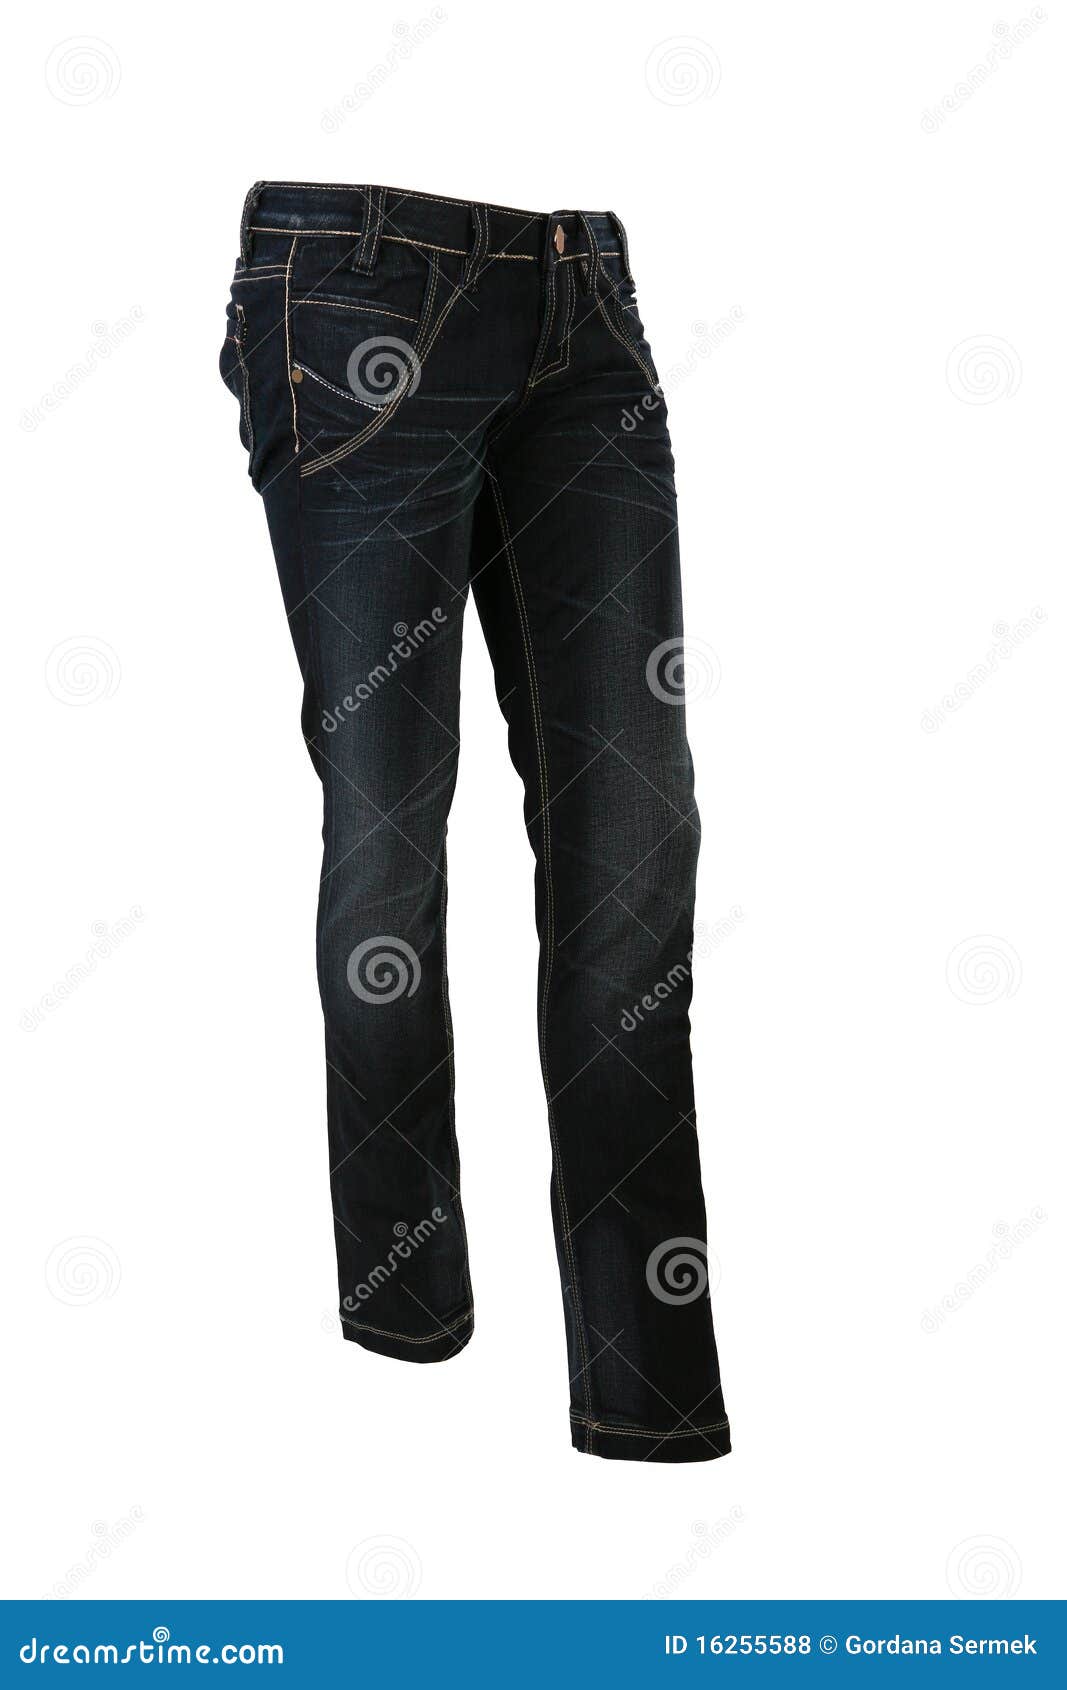 Blue jeans trousers stock photo. Image of curve, human - 16255588